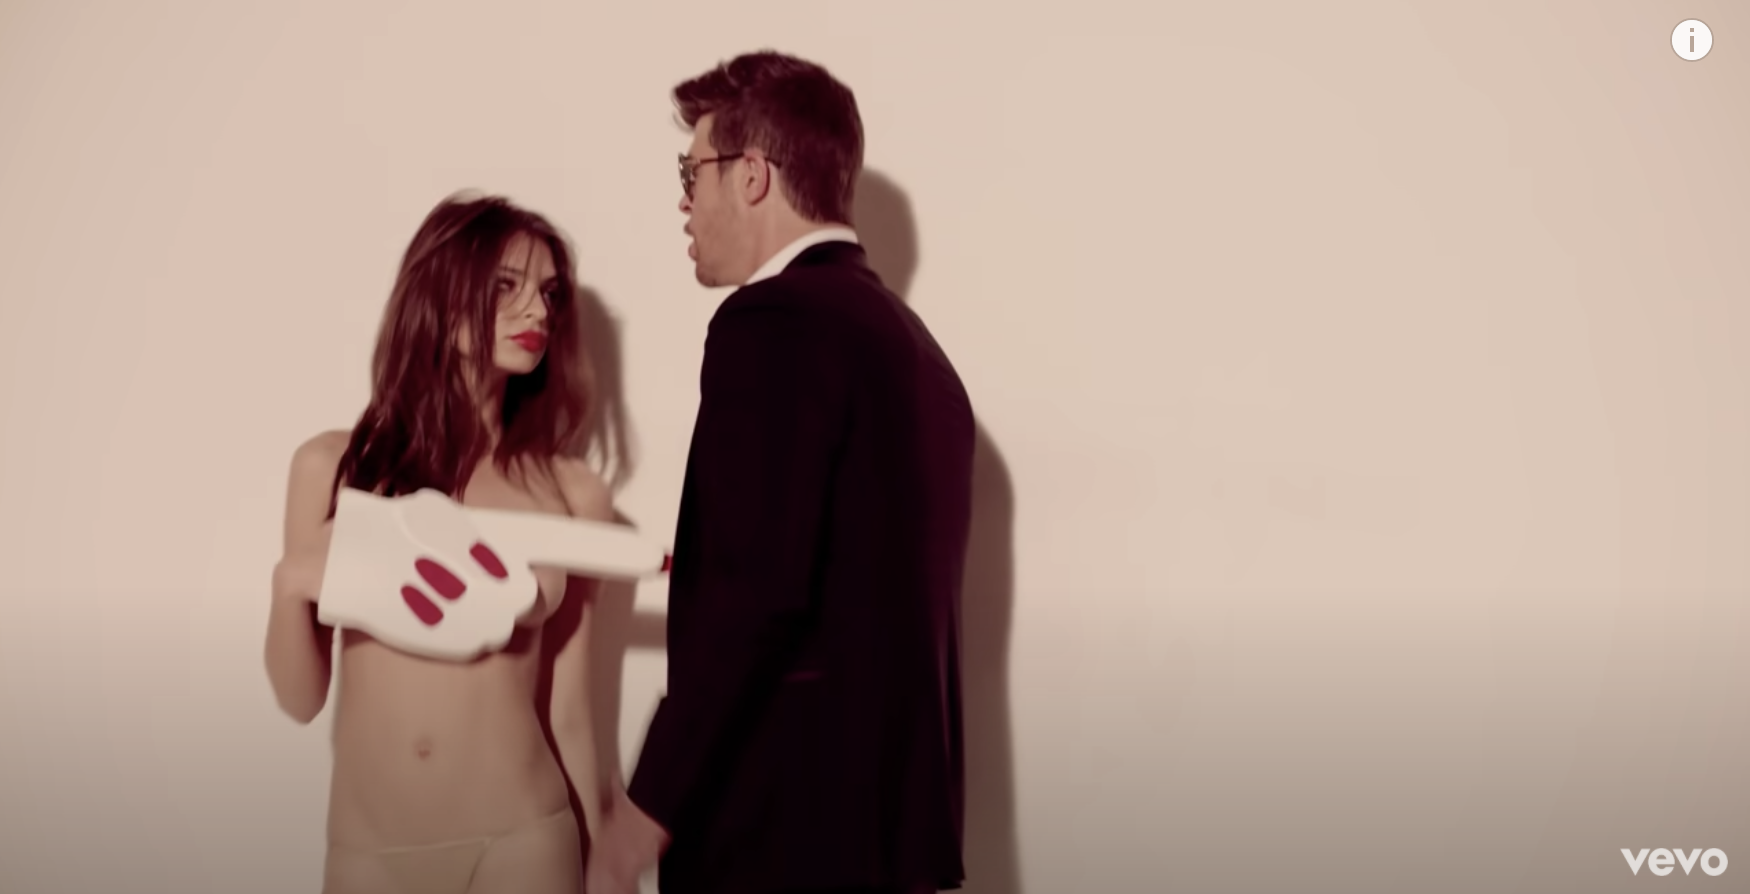 Robin Thicke Blurred Lines Uncensored